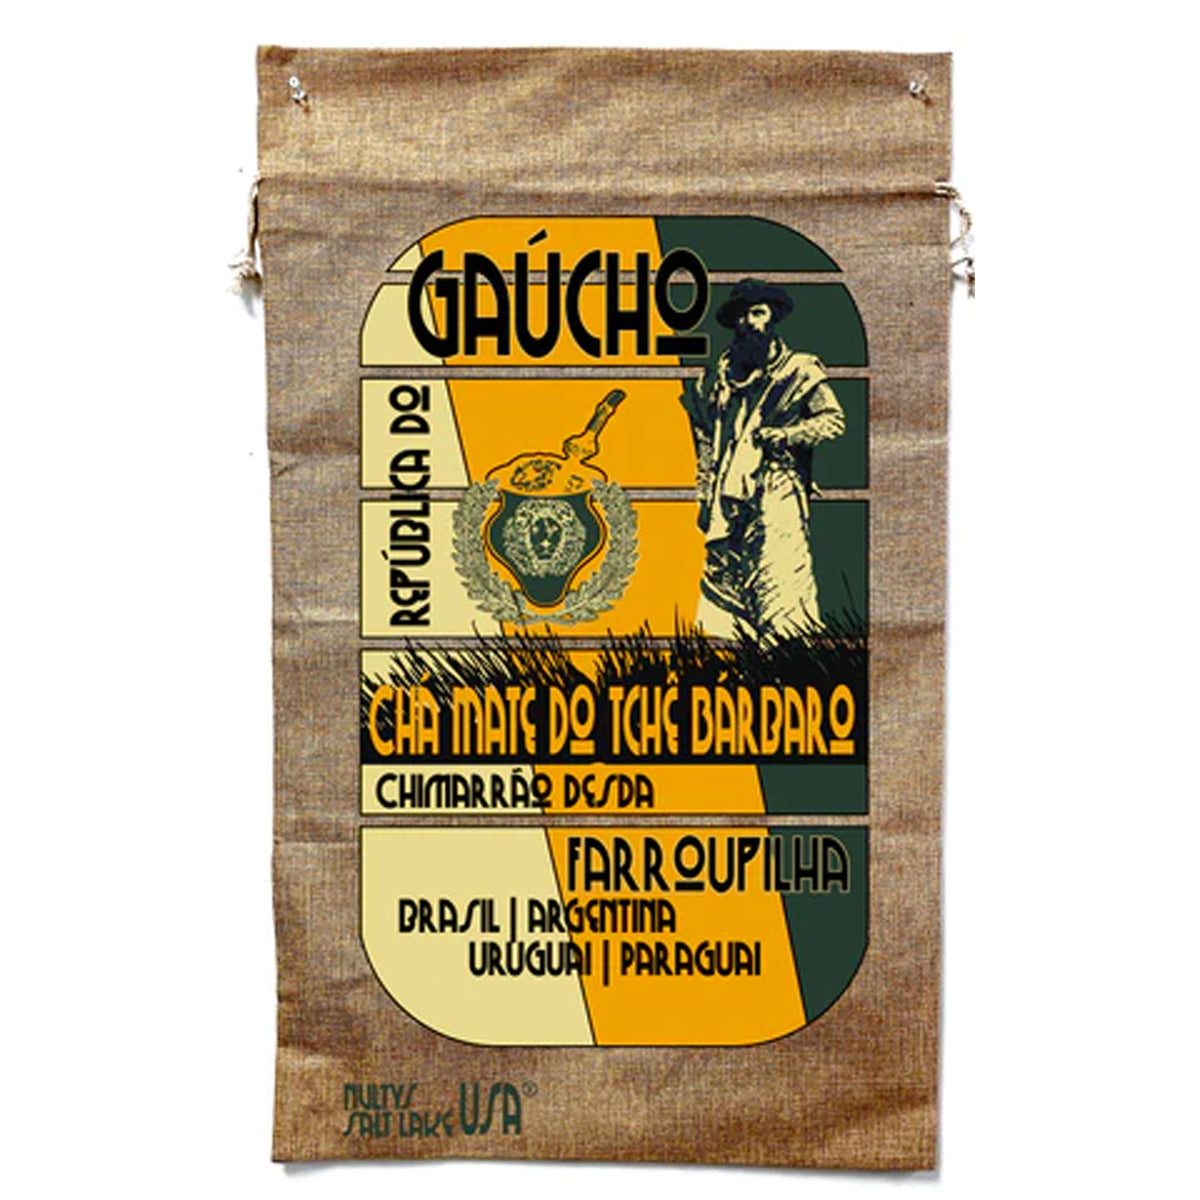 Gaucho Yerba Mate Burlap Bag - Authentic South American Charm (Sold By Piece)